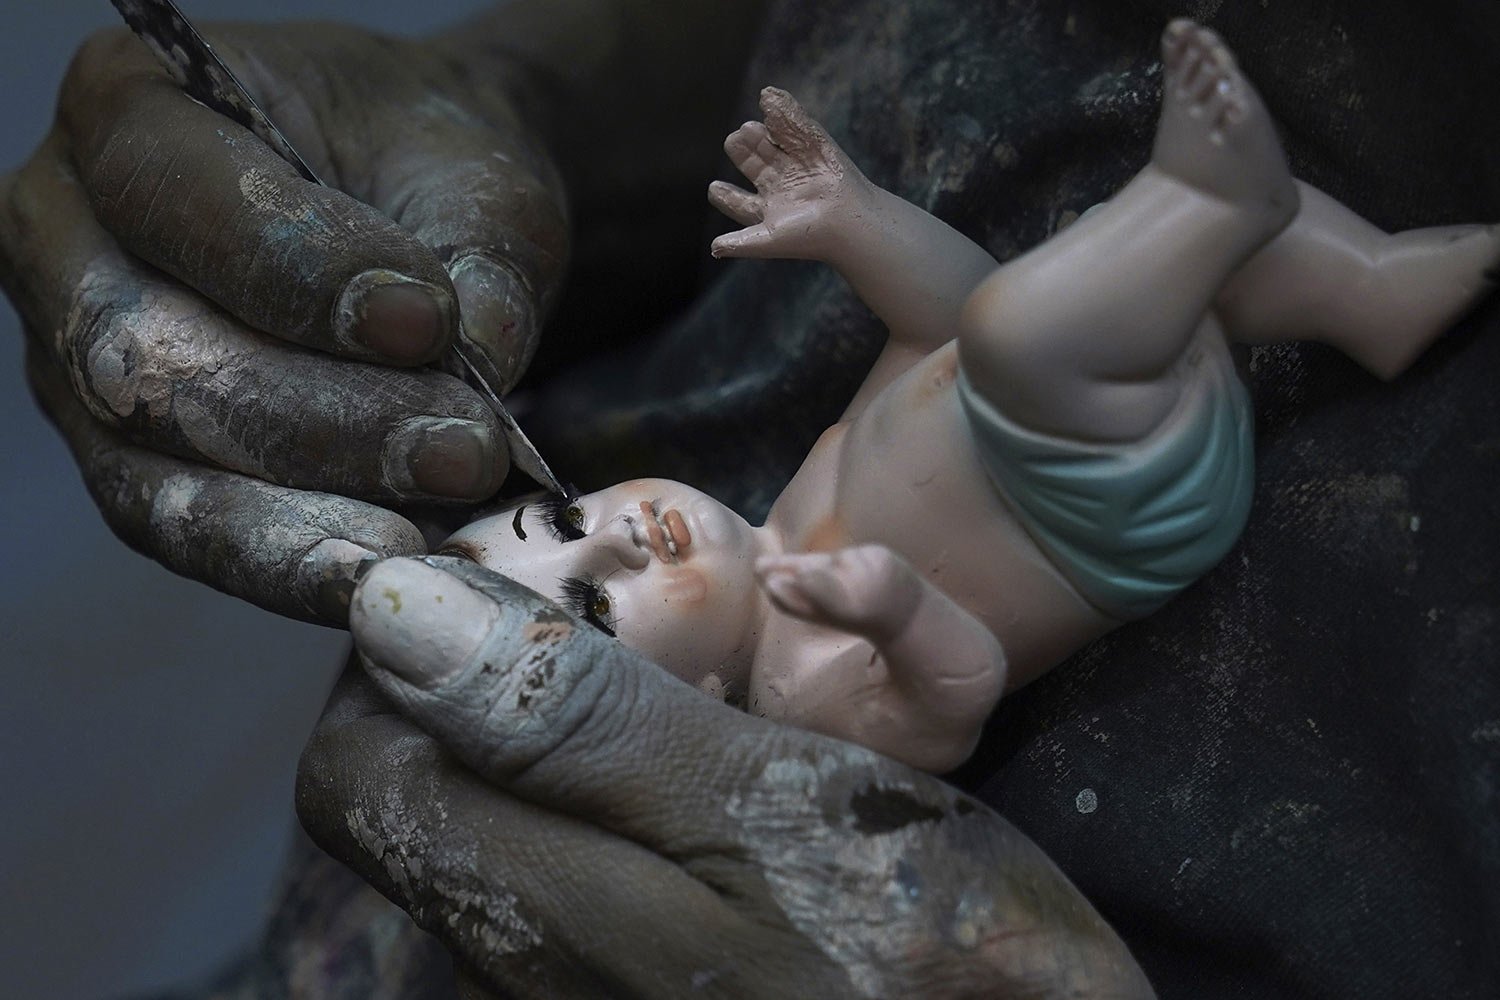  A man repairs a Baby Jesus figure in Mexico City, Jan. 25, 2023. As Mexicans prepare to celebrate Candlemas, people bring in their statues for major repairs. (AP Photo/Marco Ugarte) 